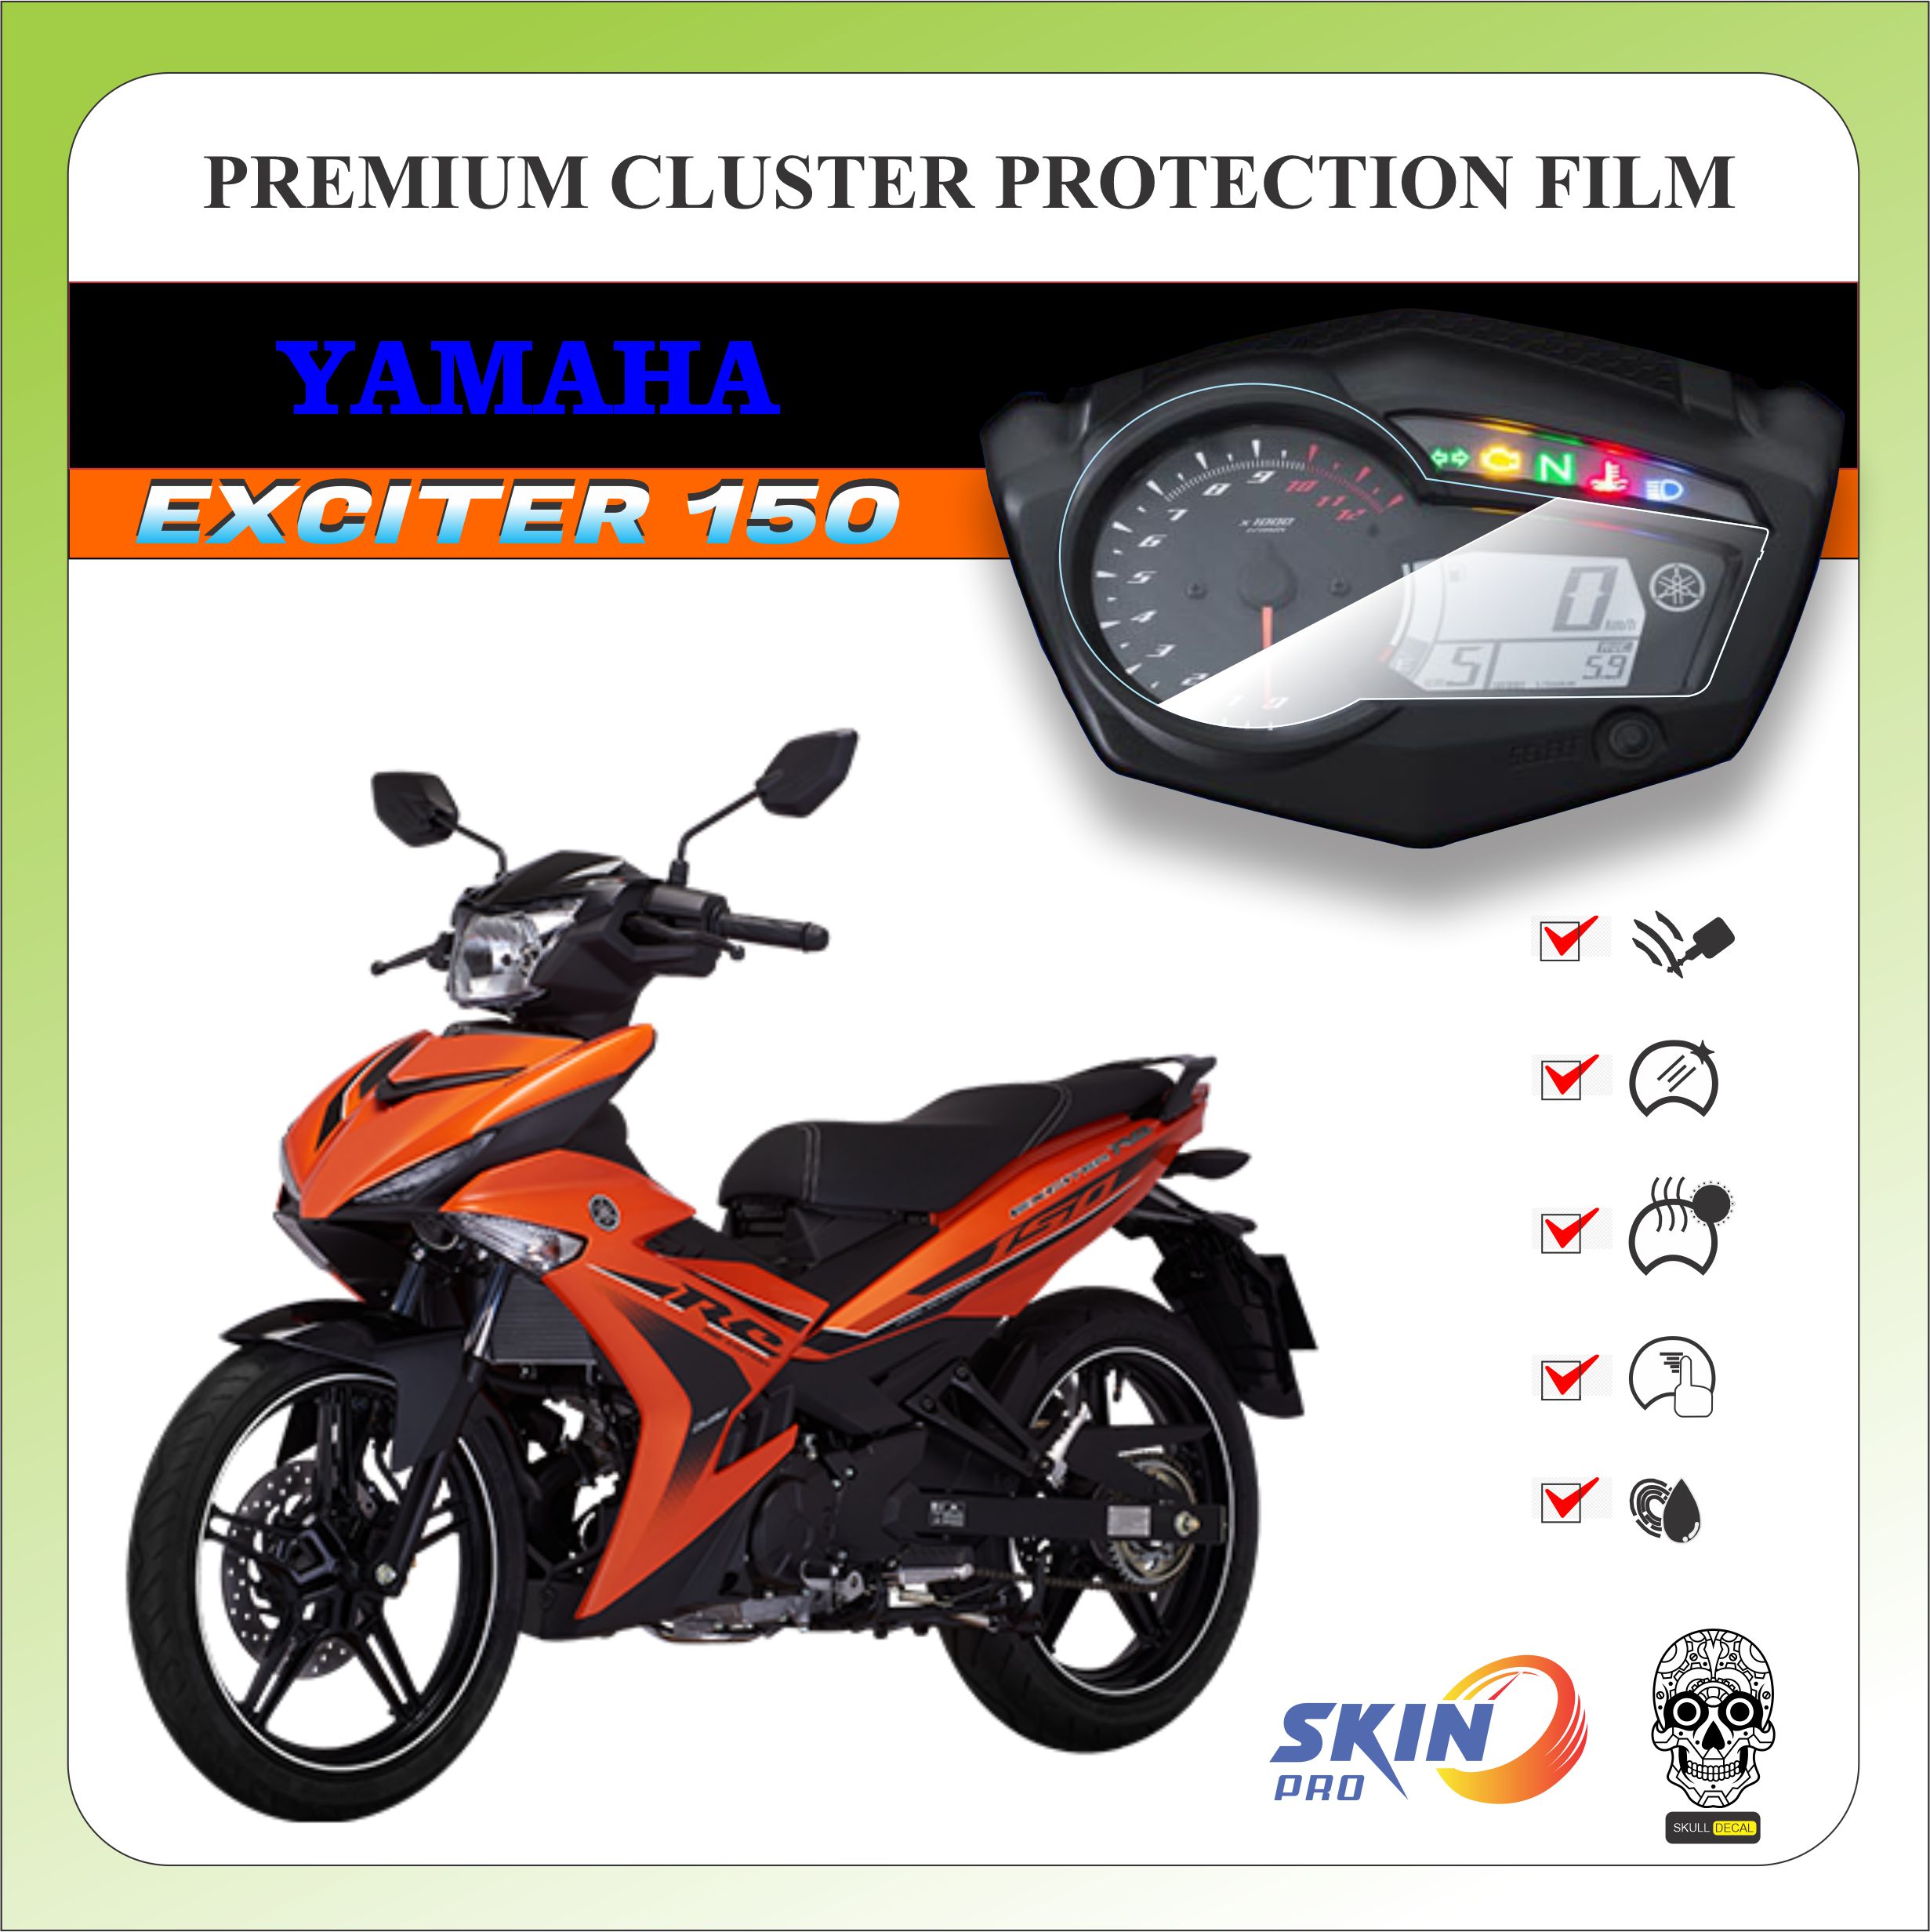 Bán xe Exciter 150 2015 Style  Chugiongcom